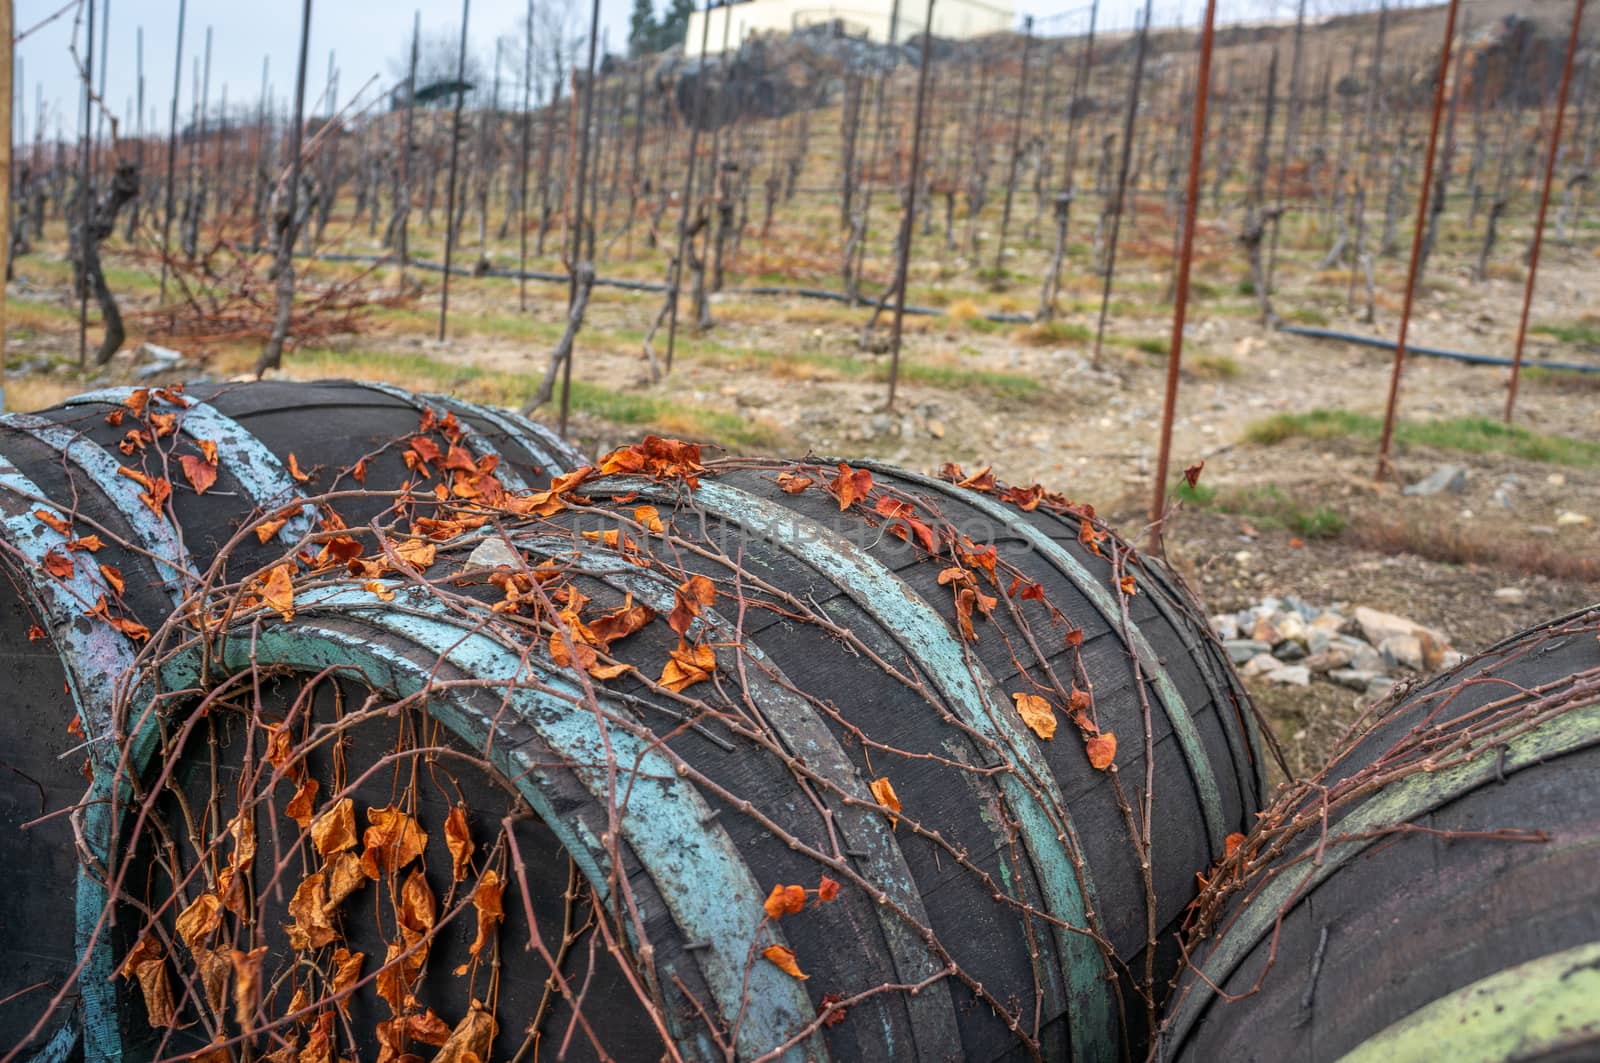 Hilly vineyard background with focus on the orange vibrant dry leaves climing on vintage wine barrels in St. Claires vineayrd Prague. Bright daylight and fall season concept.